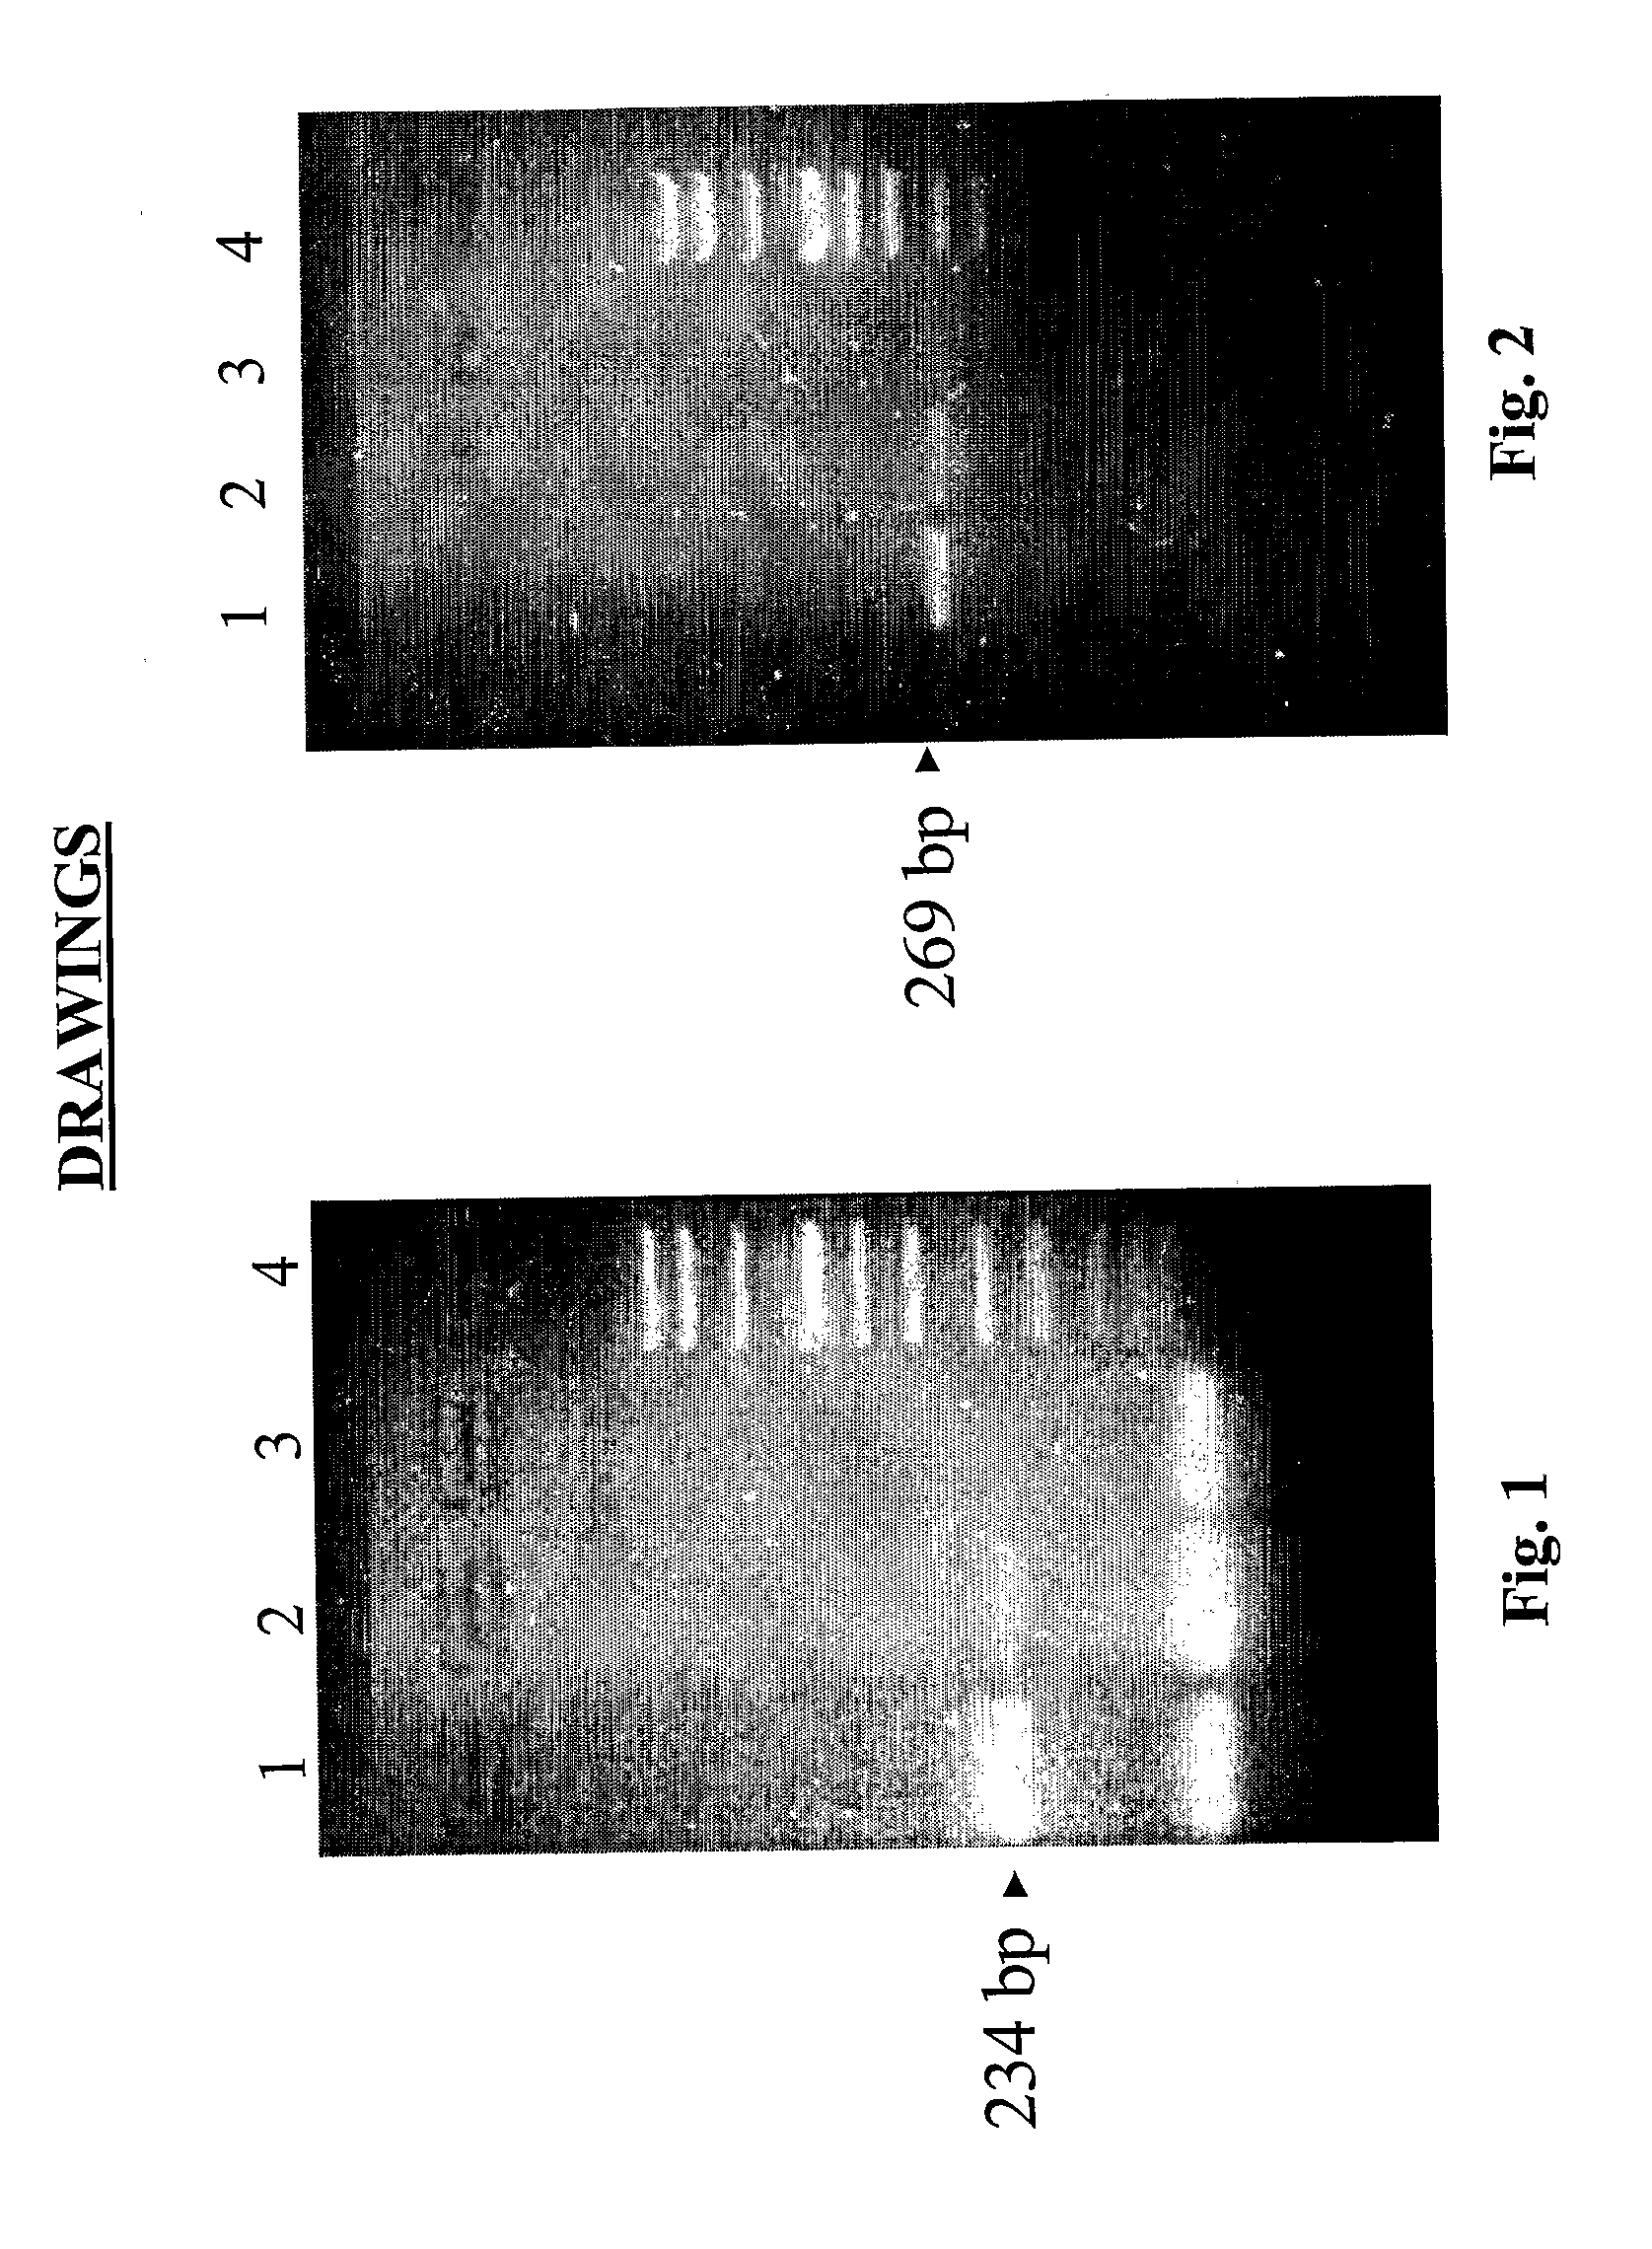 Method for simultaneous extraction of nucleic acids from a biological sample